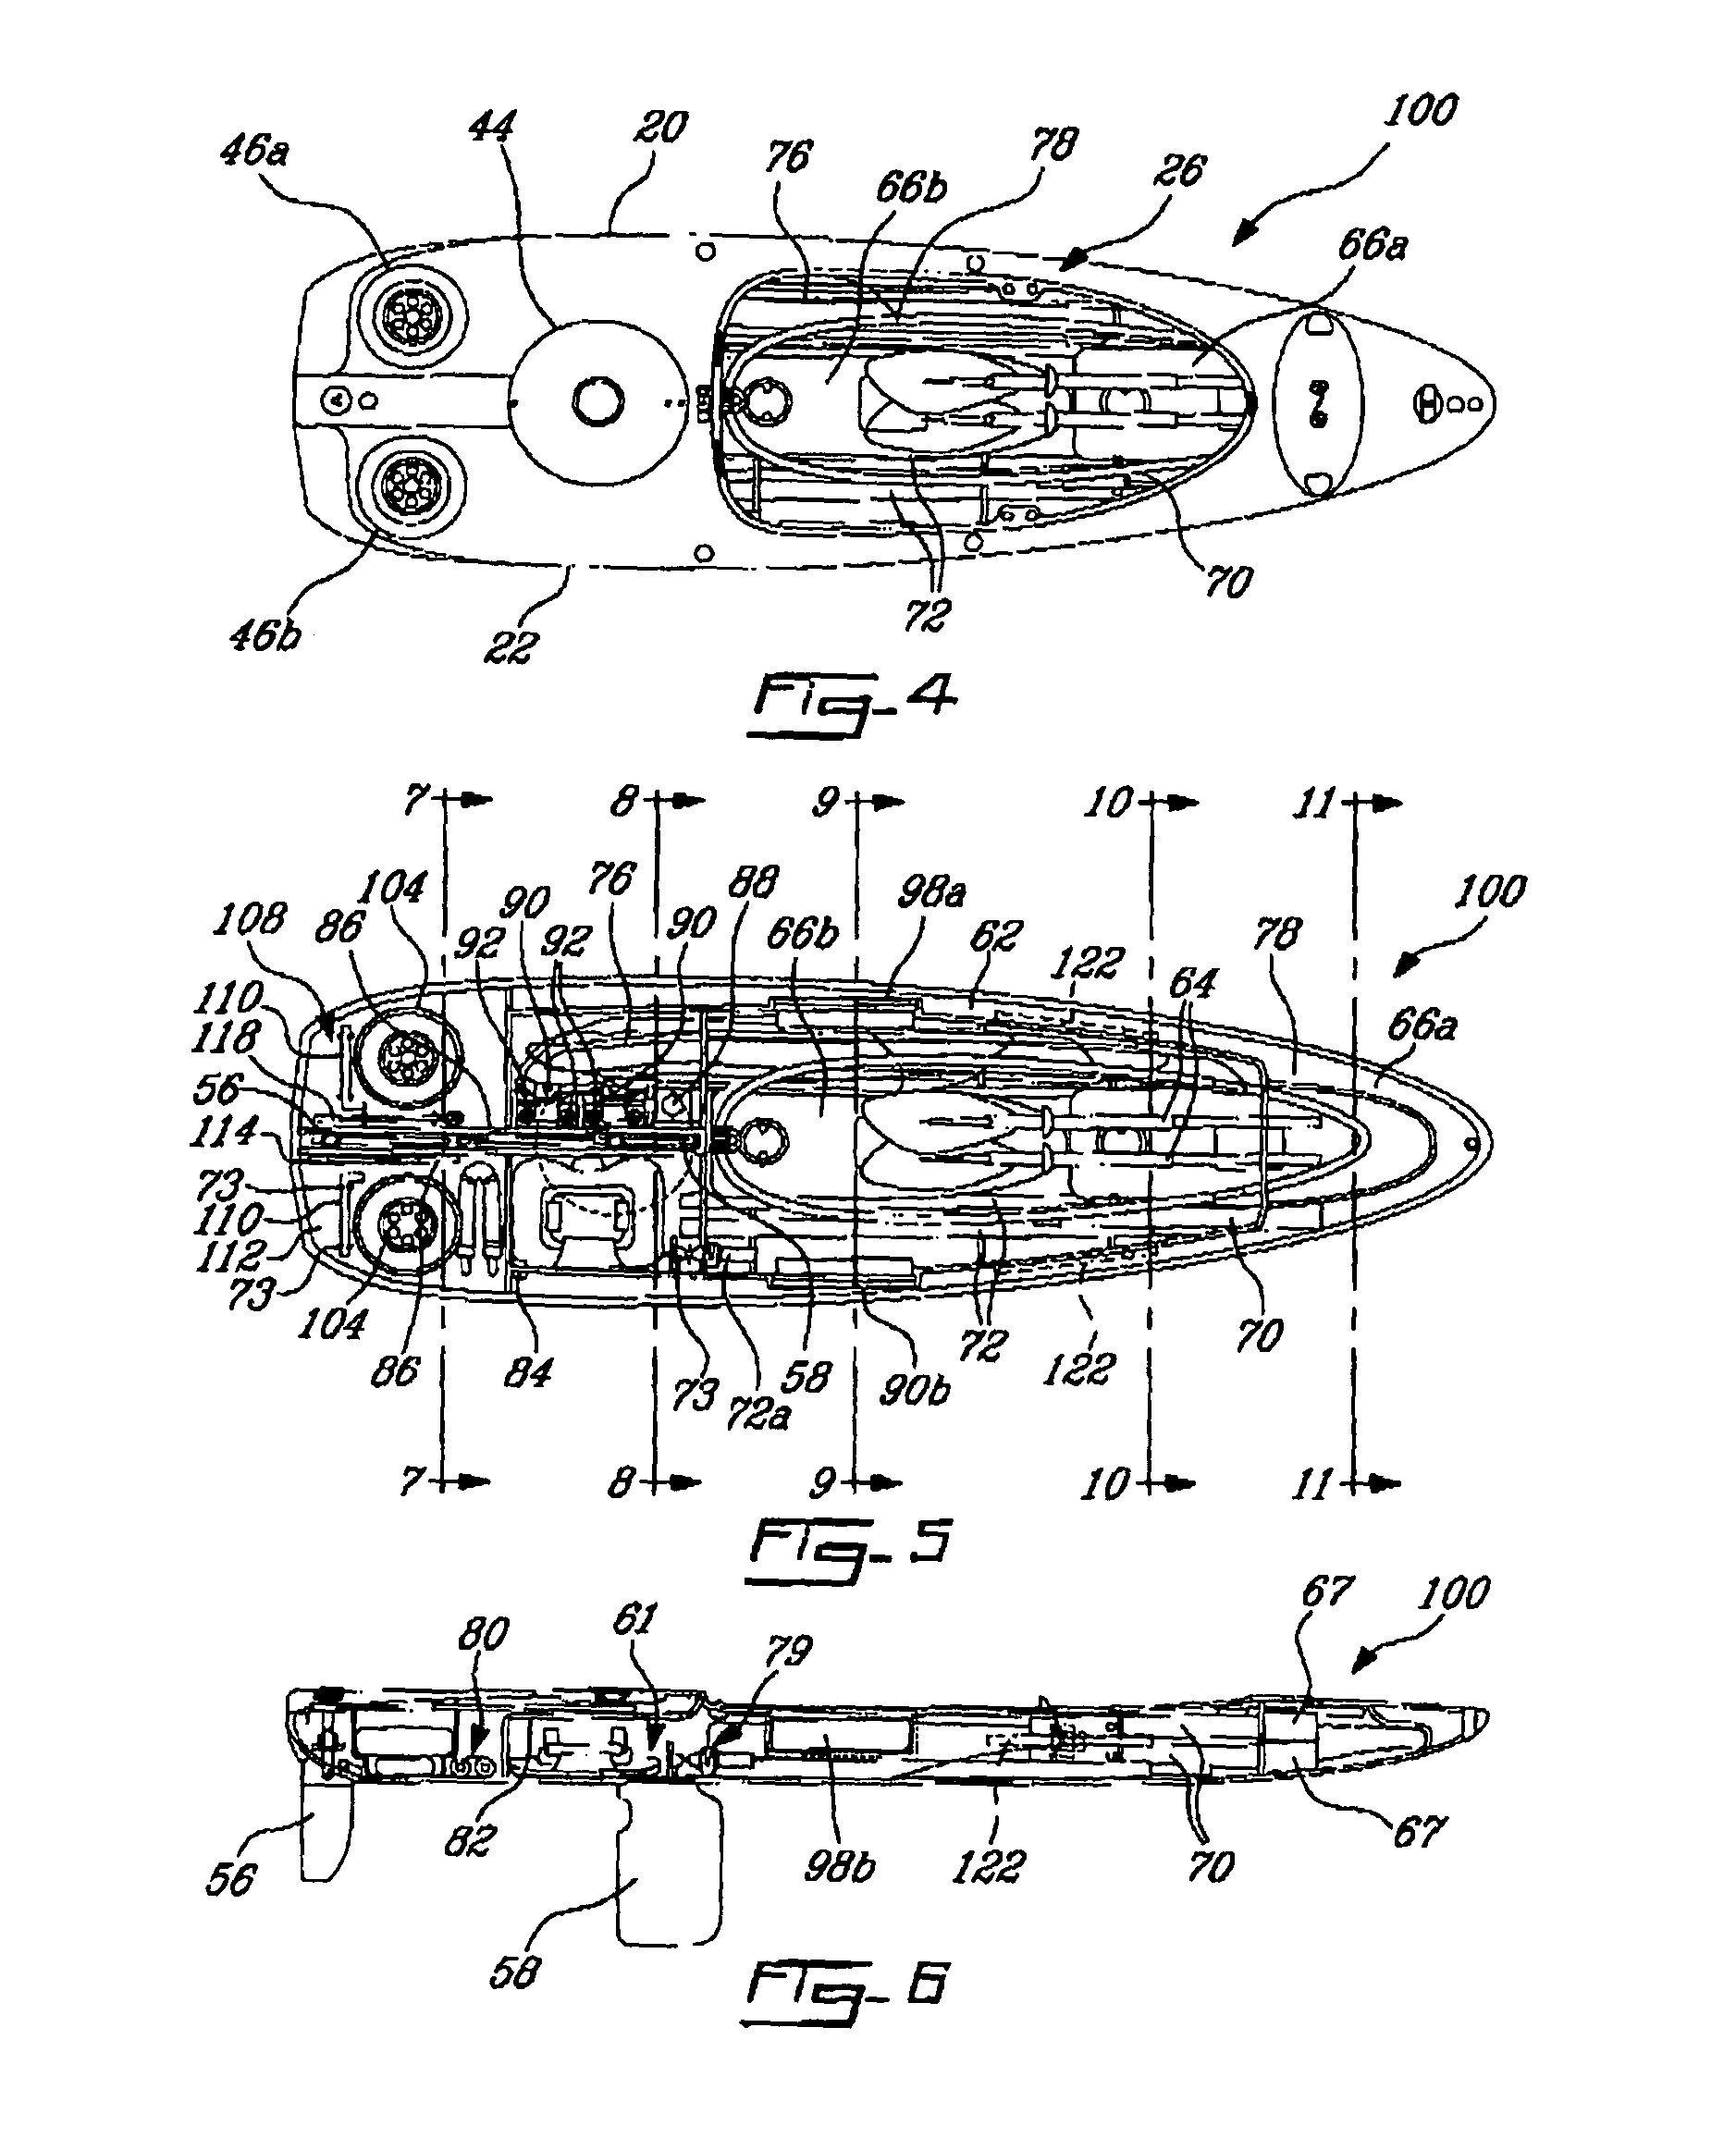 Transformable, multifunctional and self-stowage watercraft